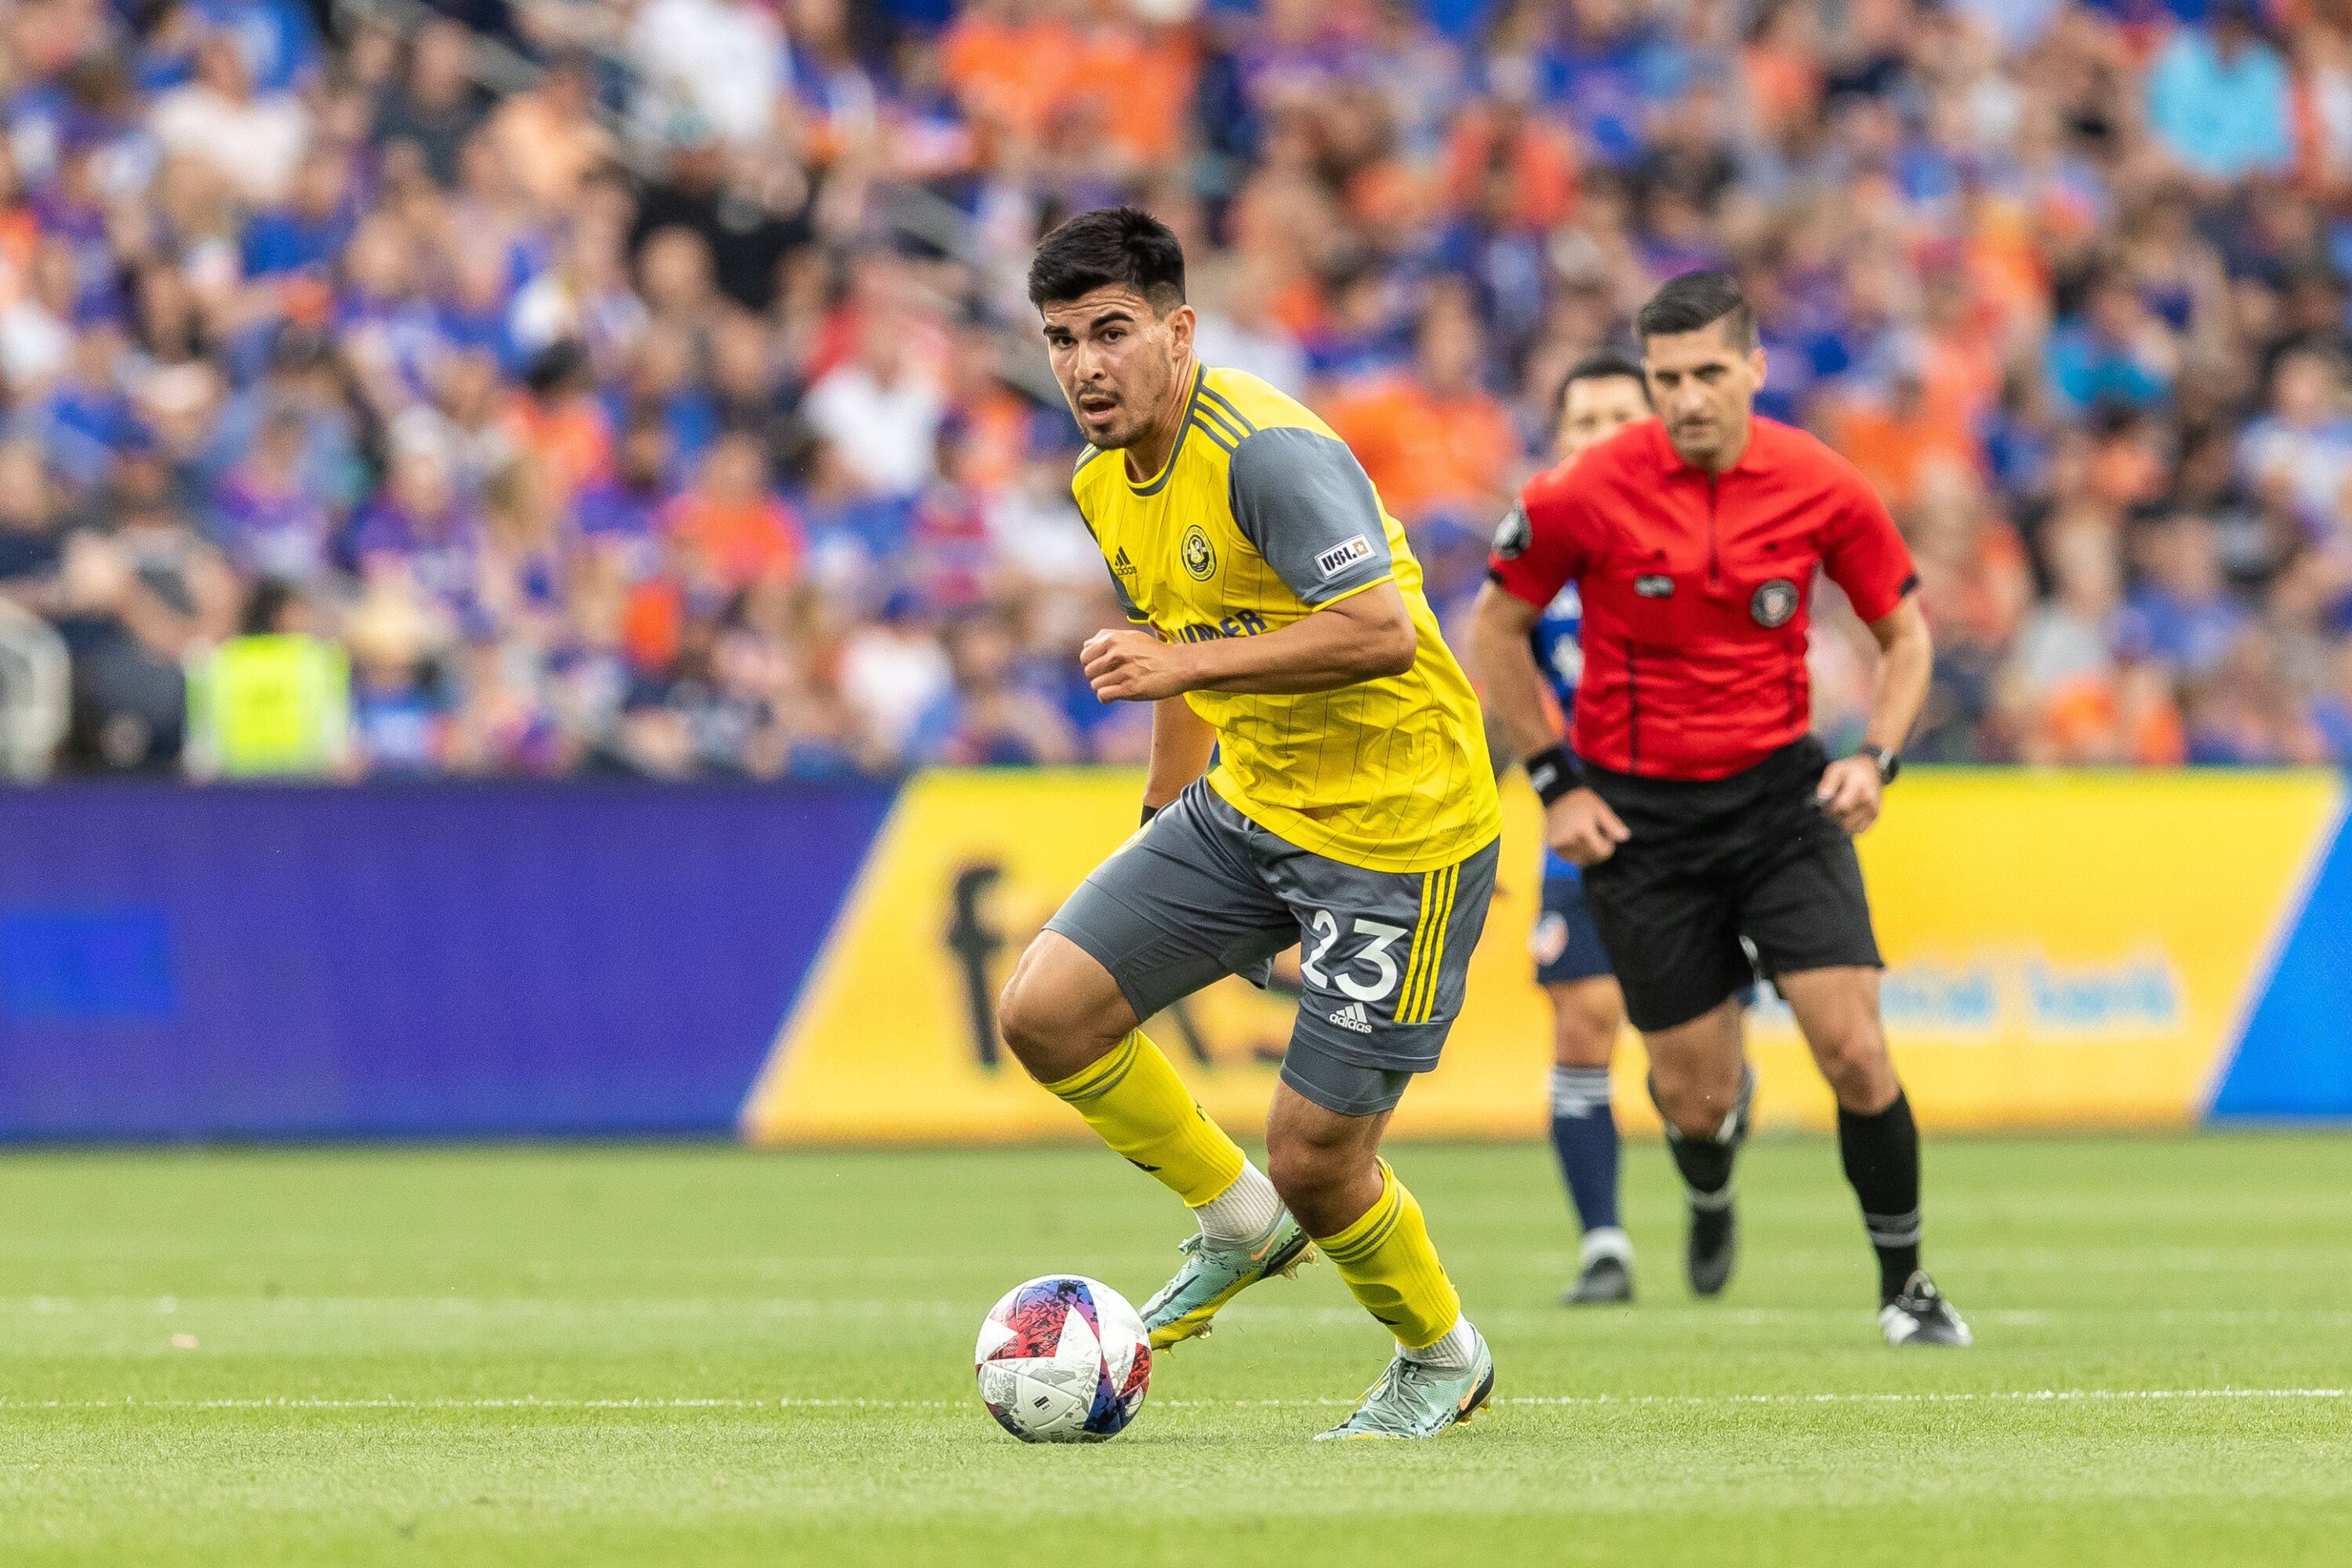 Marc Ybarra will play a large role for the Pittsburgh Riverhounds in their game against Louisville City FC